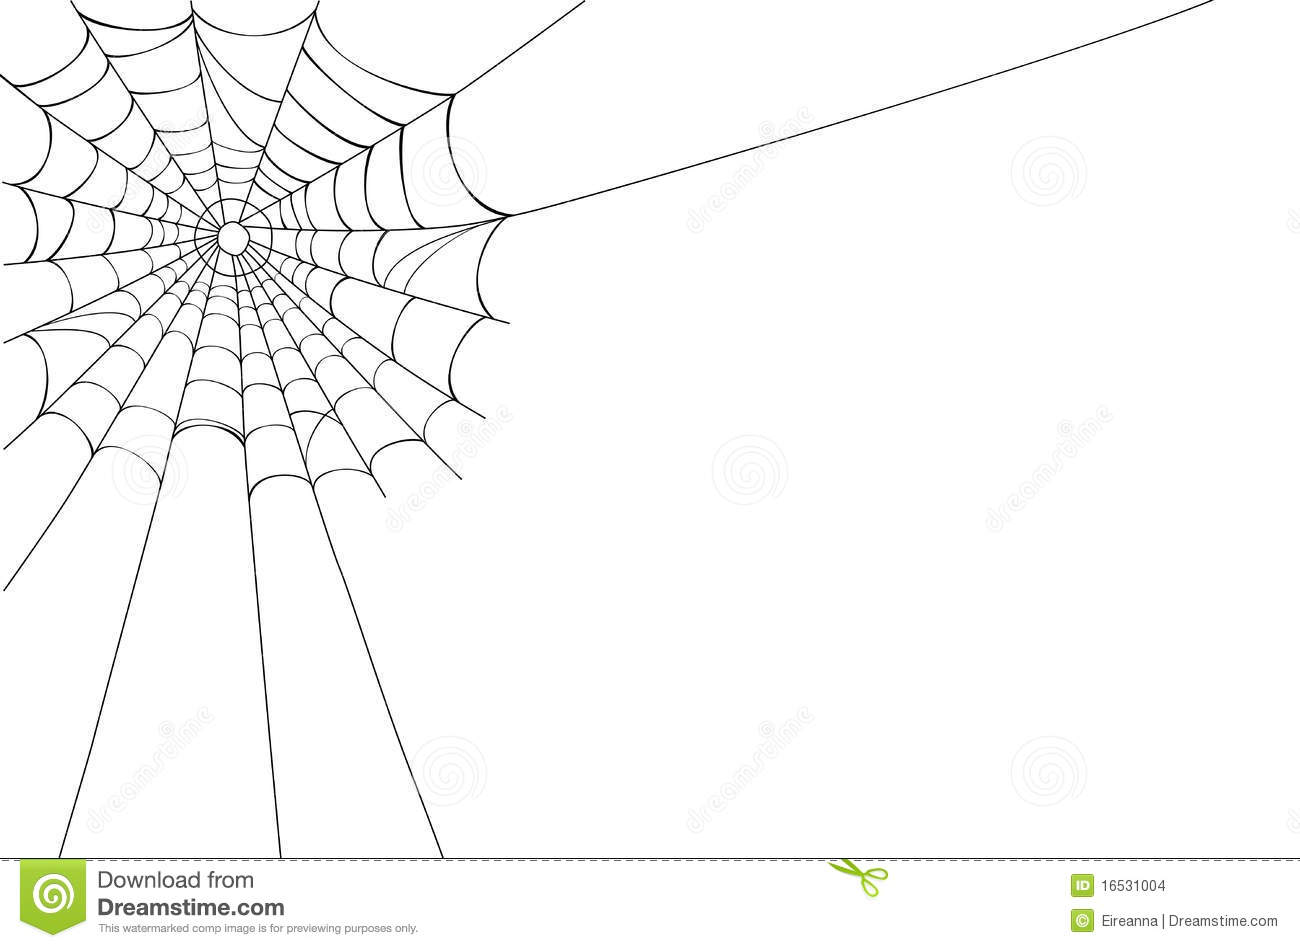 Creepy Spider Web In The Corner  Isolated Over White Background With